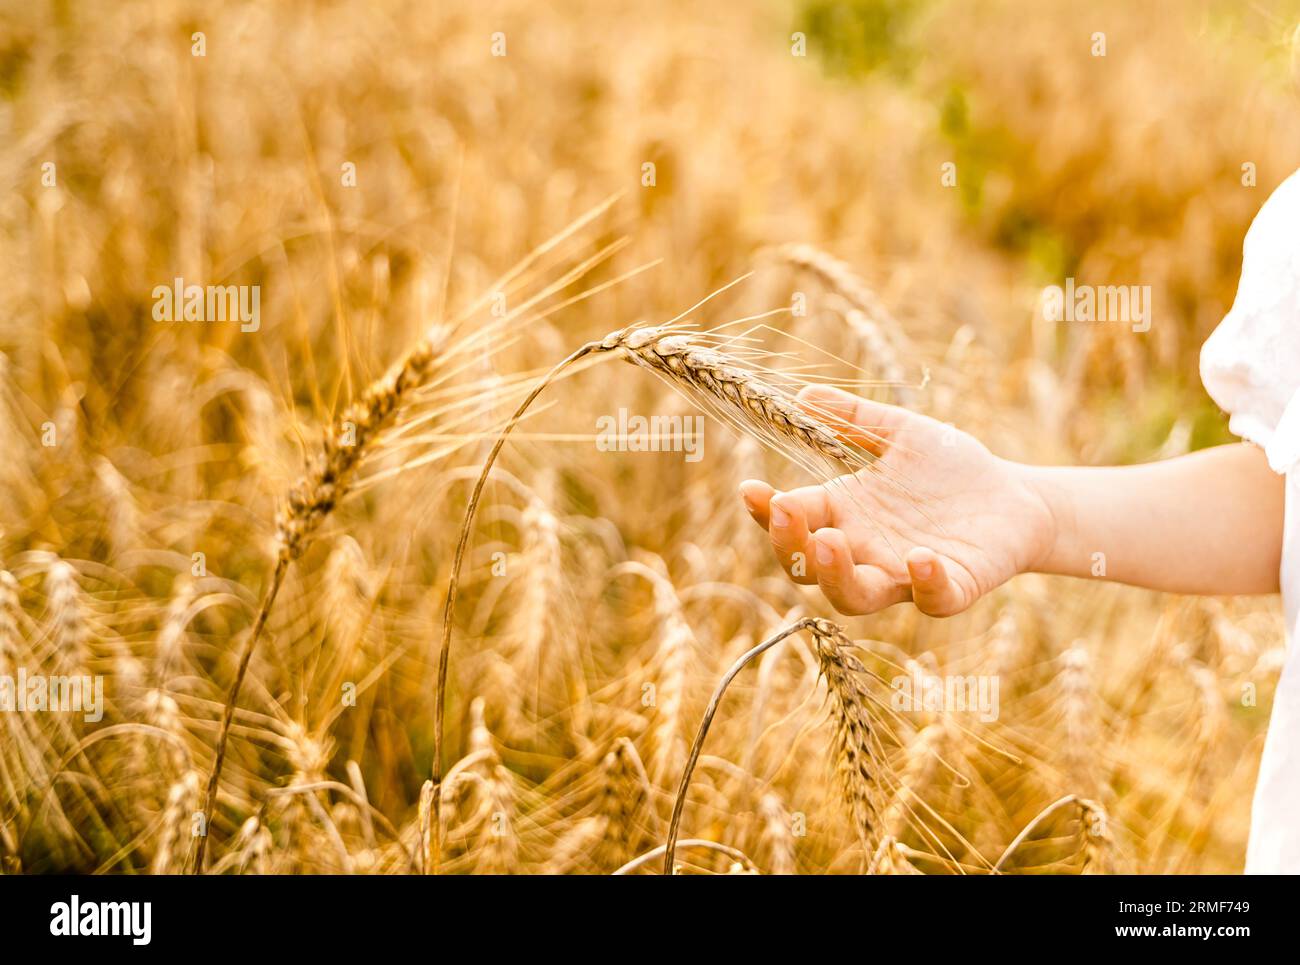 Happy girl walks in beautiful wheat field, embracing summer's yellow sun, nature freedom outdoors. White dress, straw hat, surrounded by rye, barley. Stock Photo